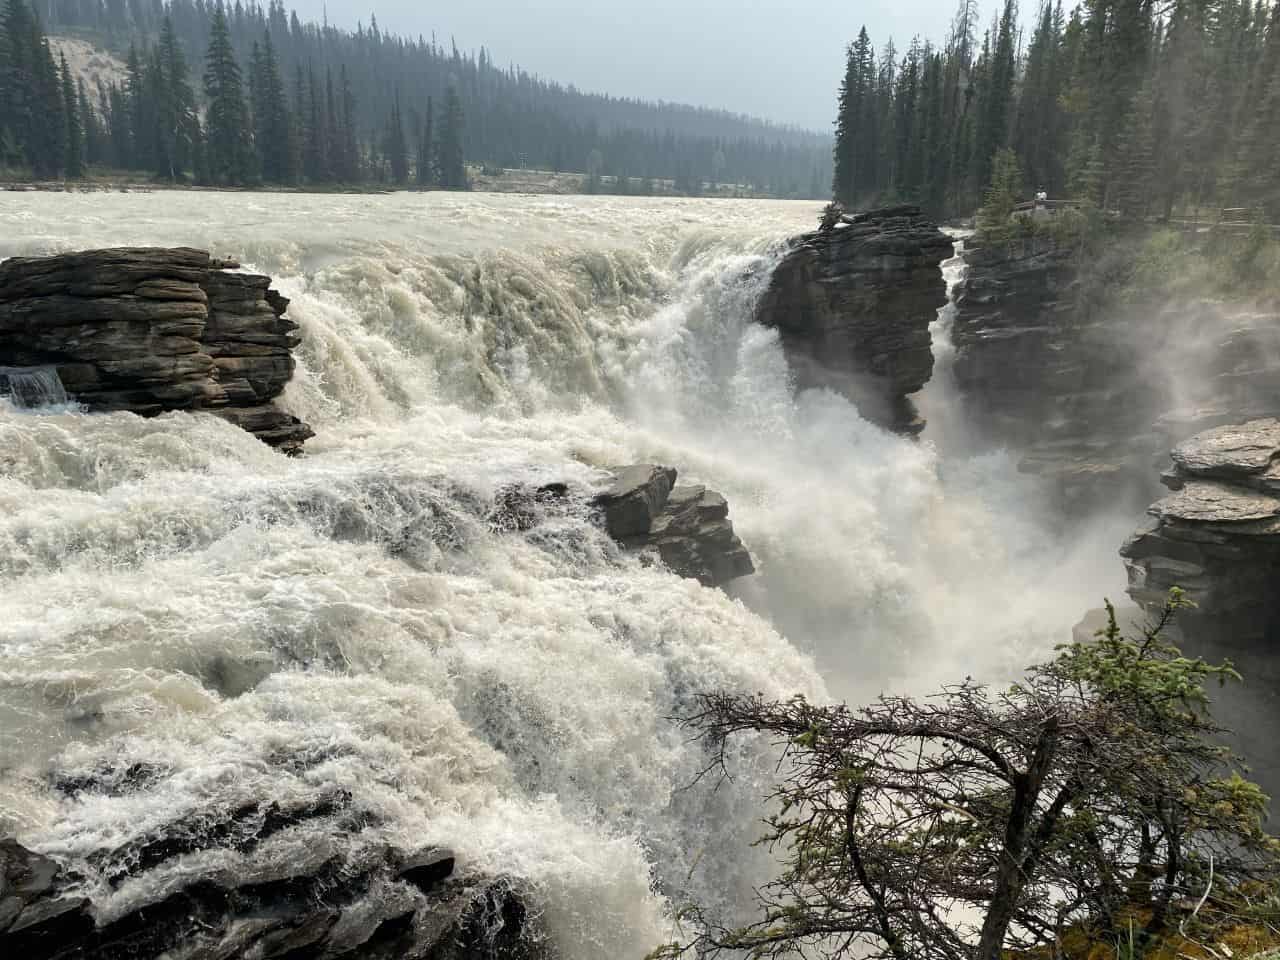 The waters are roaring over Athabasca Falls in Jasper National Park. These falls are about 30km south from the Town of Jasper in the Canadian Rockies.